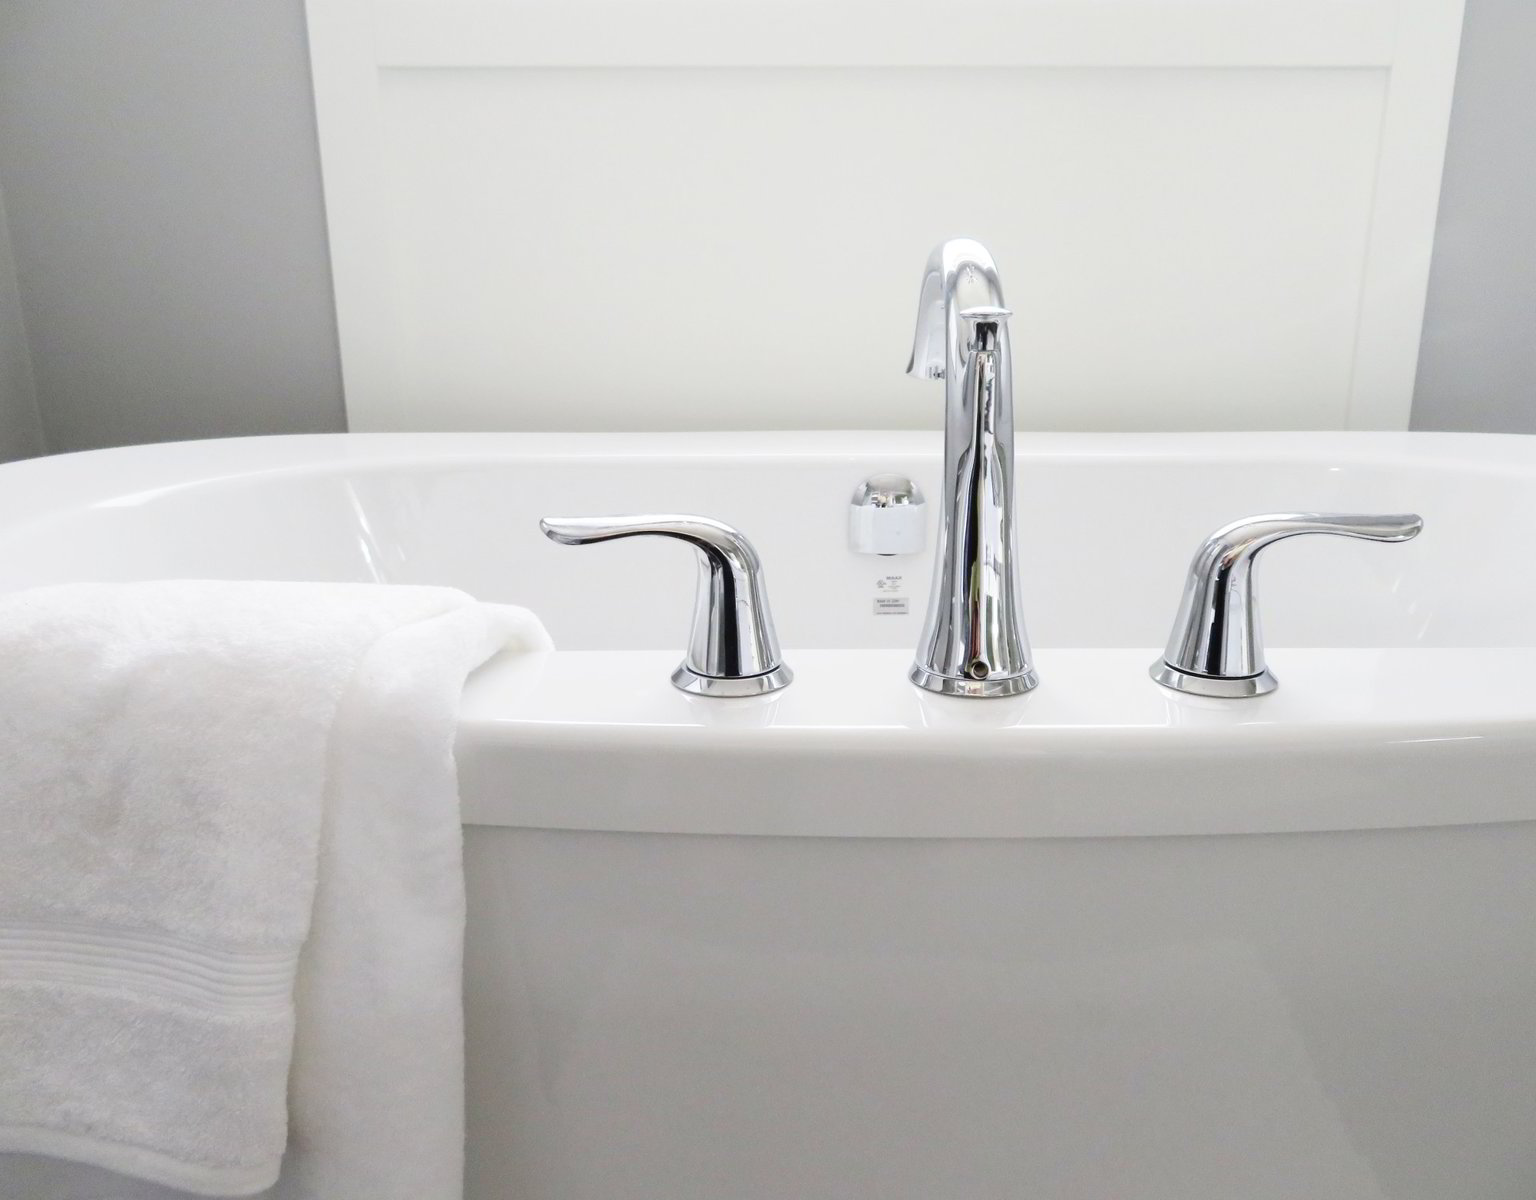 How To Fix A Leaky Bathtub Faucet, How To Fix Hot Water Leak In Bathtub